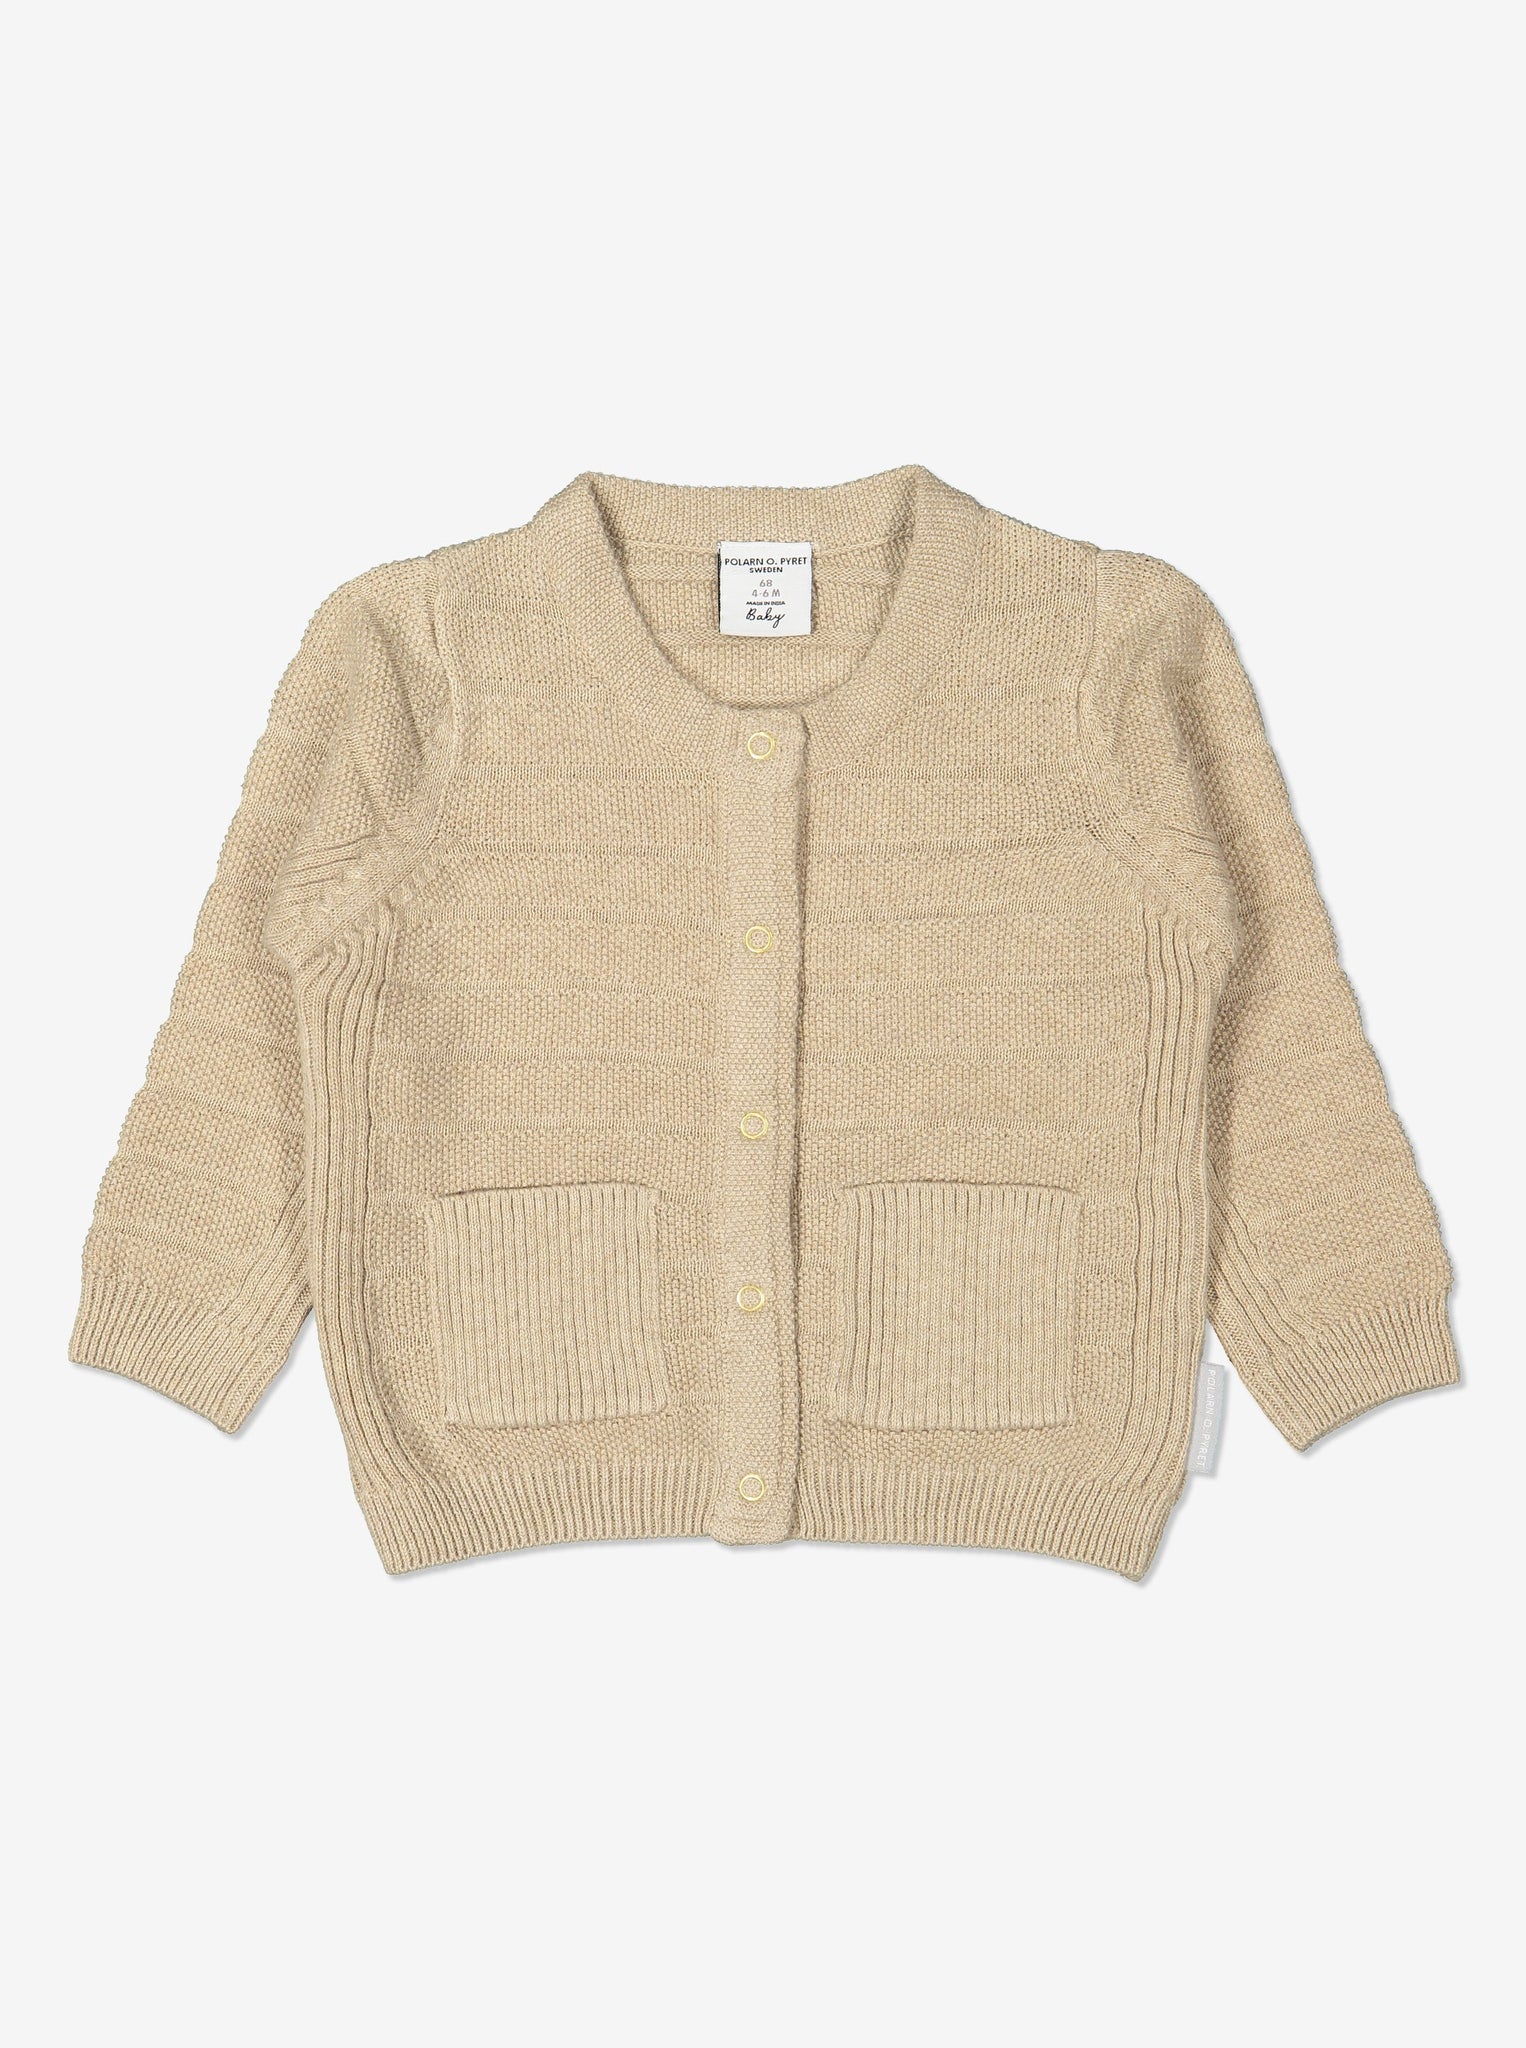 Unisex Beige Baby Cardigan in 100% organic cotton.  In a textured knit with front popper fastening and two small patch pockets.